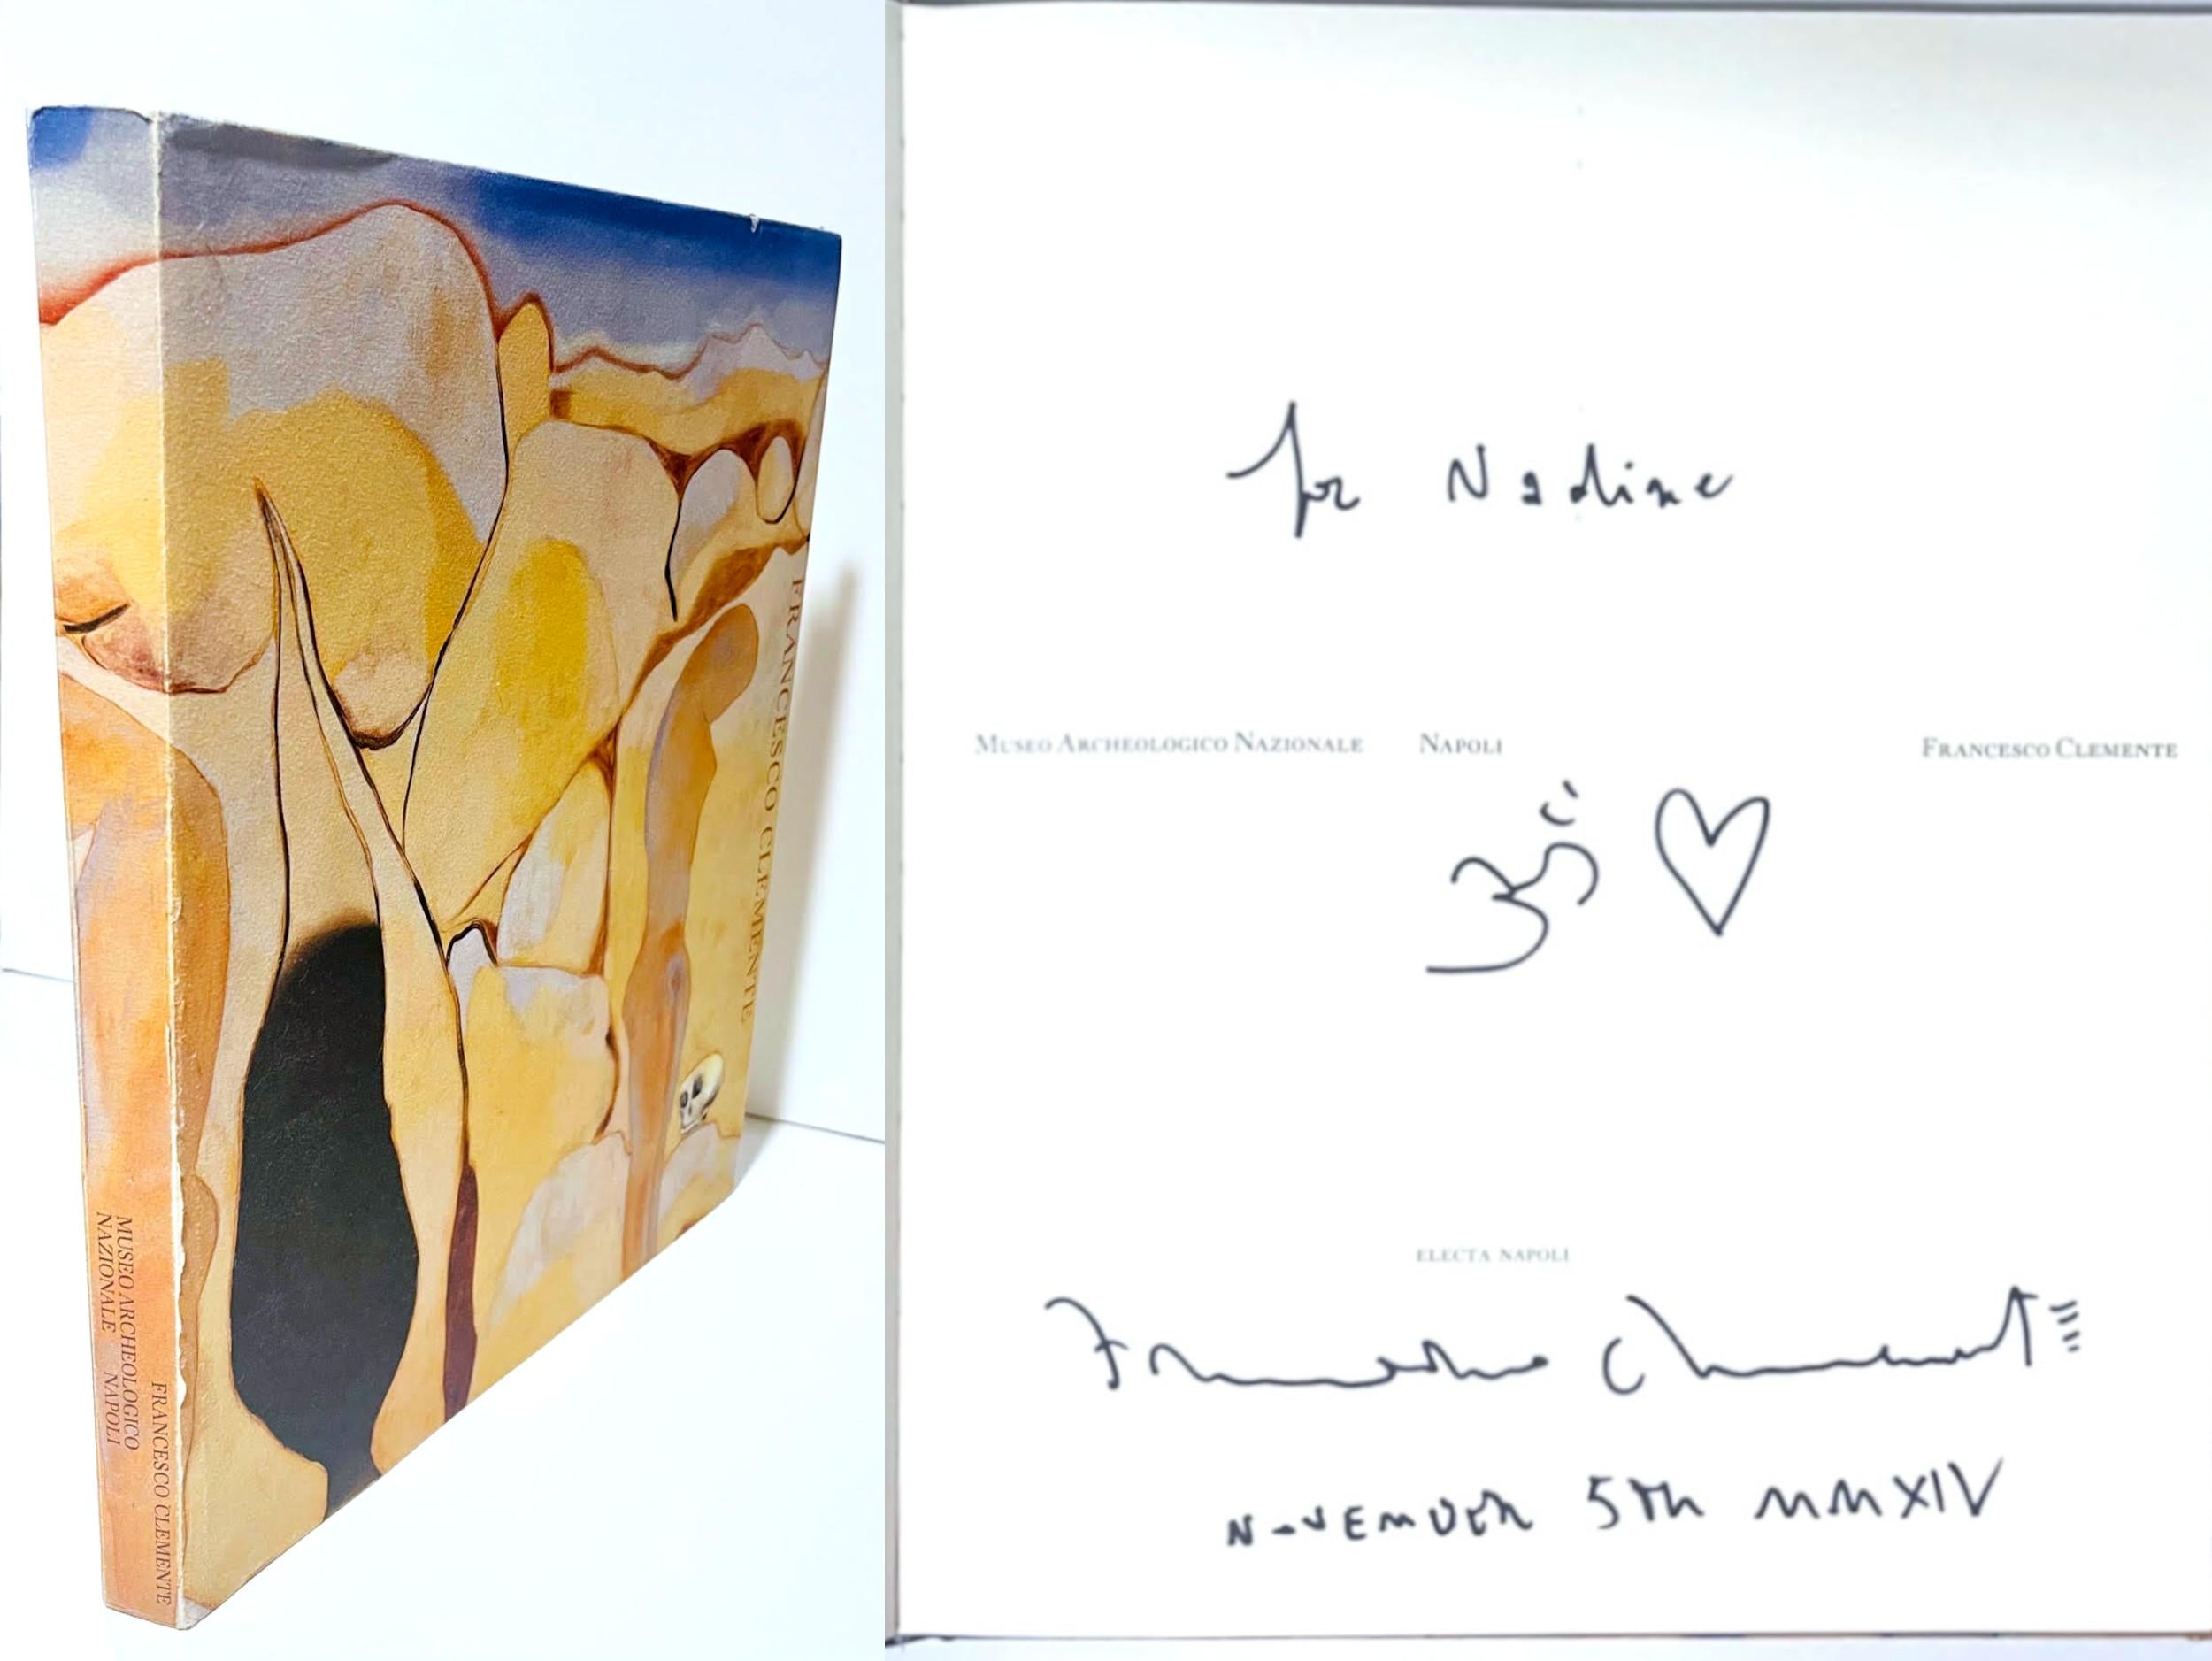 Francesco Clemente (Hand signed, inscribed and dated 2014 (MMXIV) to Nadine with drawings in black marker), 2002
Hardback monograph with dust jacket (Hand signed, inscribed and dated 2014 (MMXIV) to Nadine with doodles in black marker)
Hand signed,